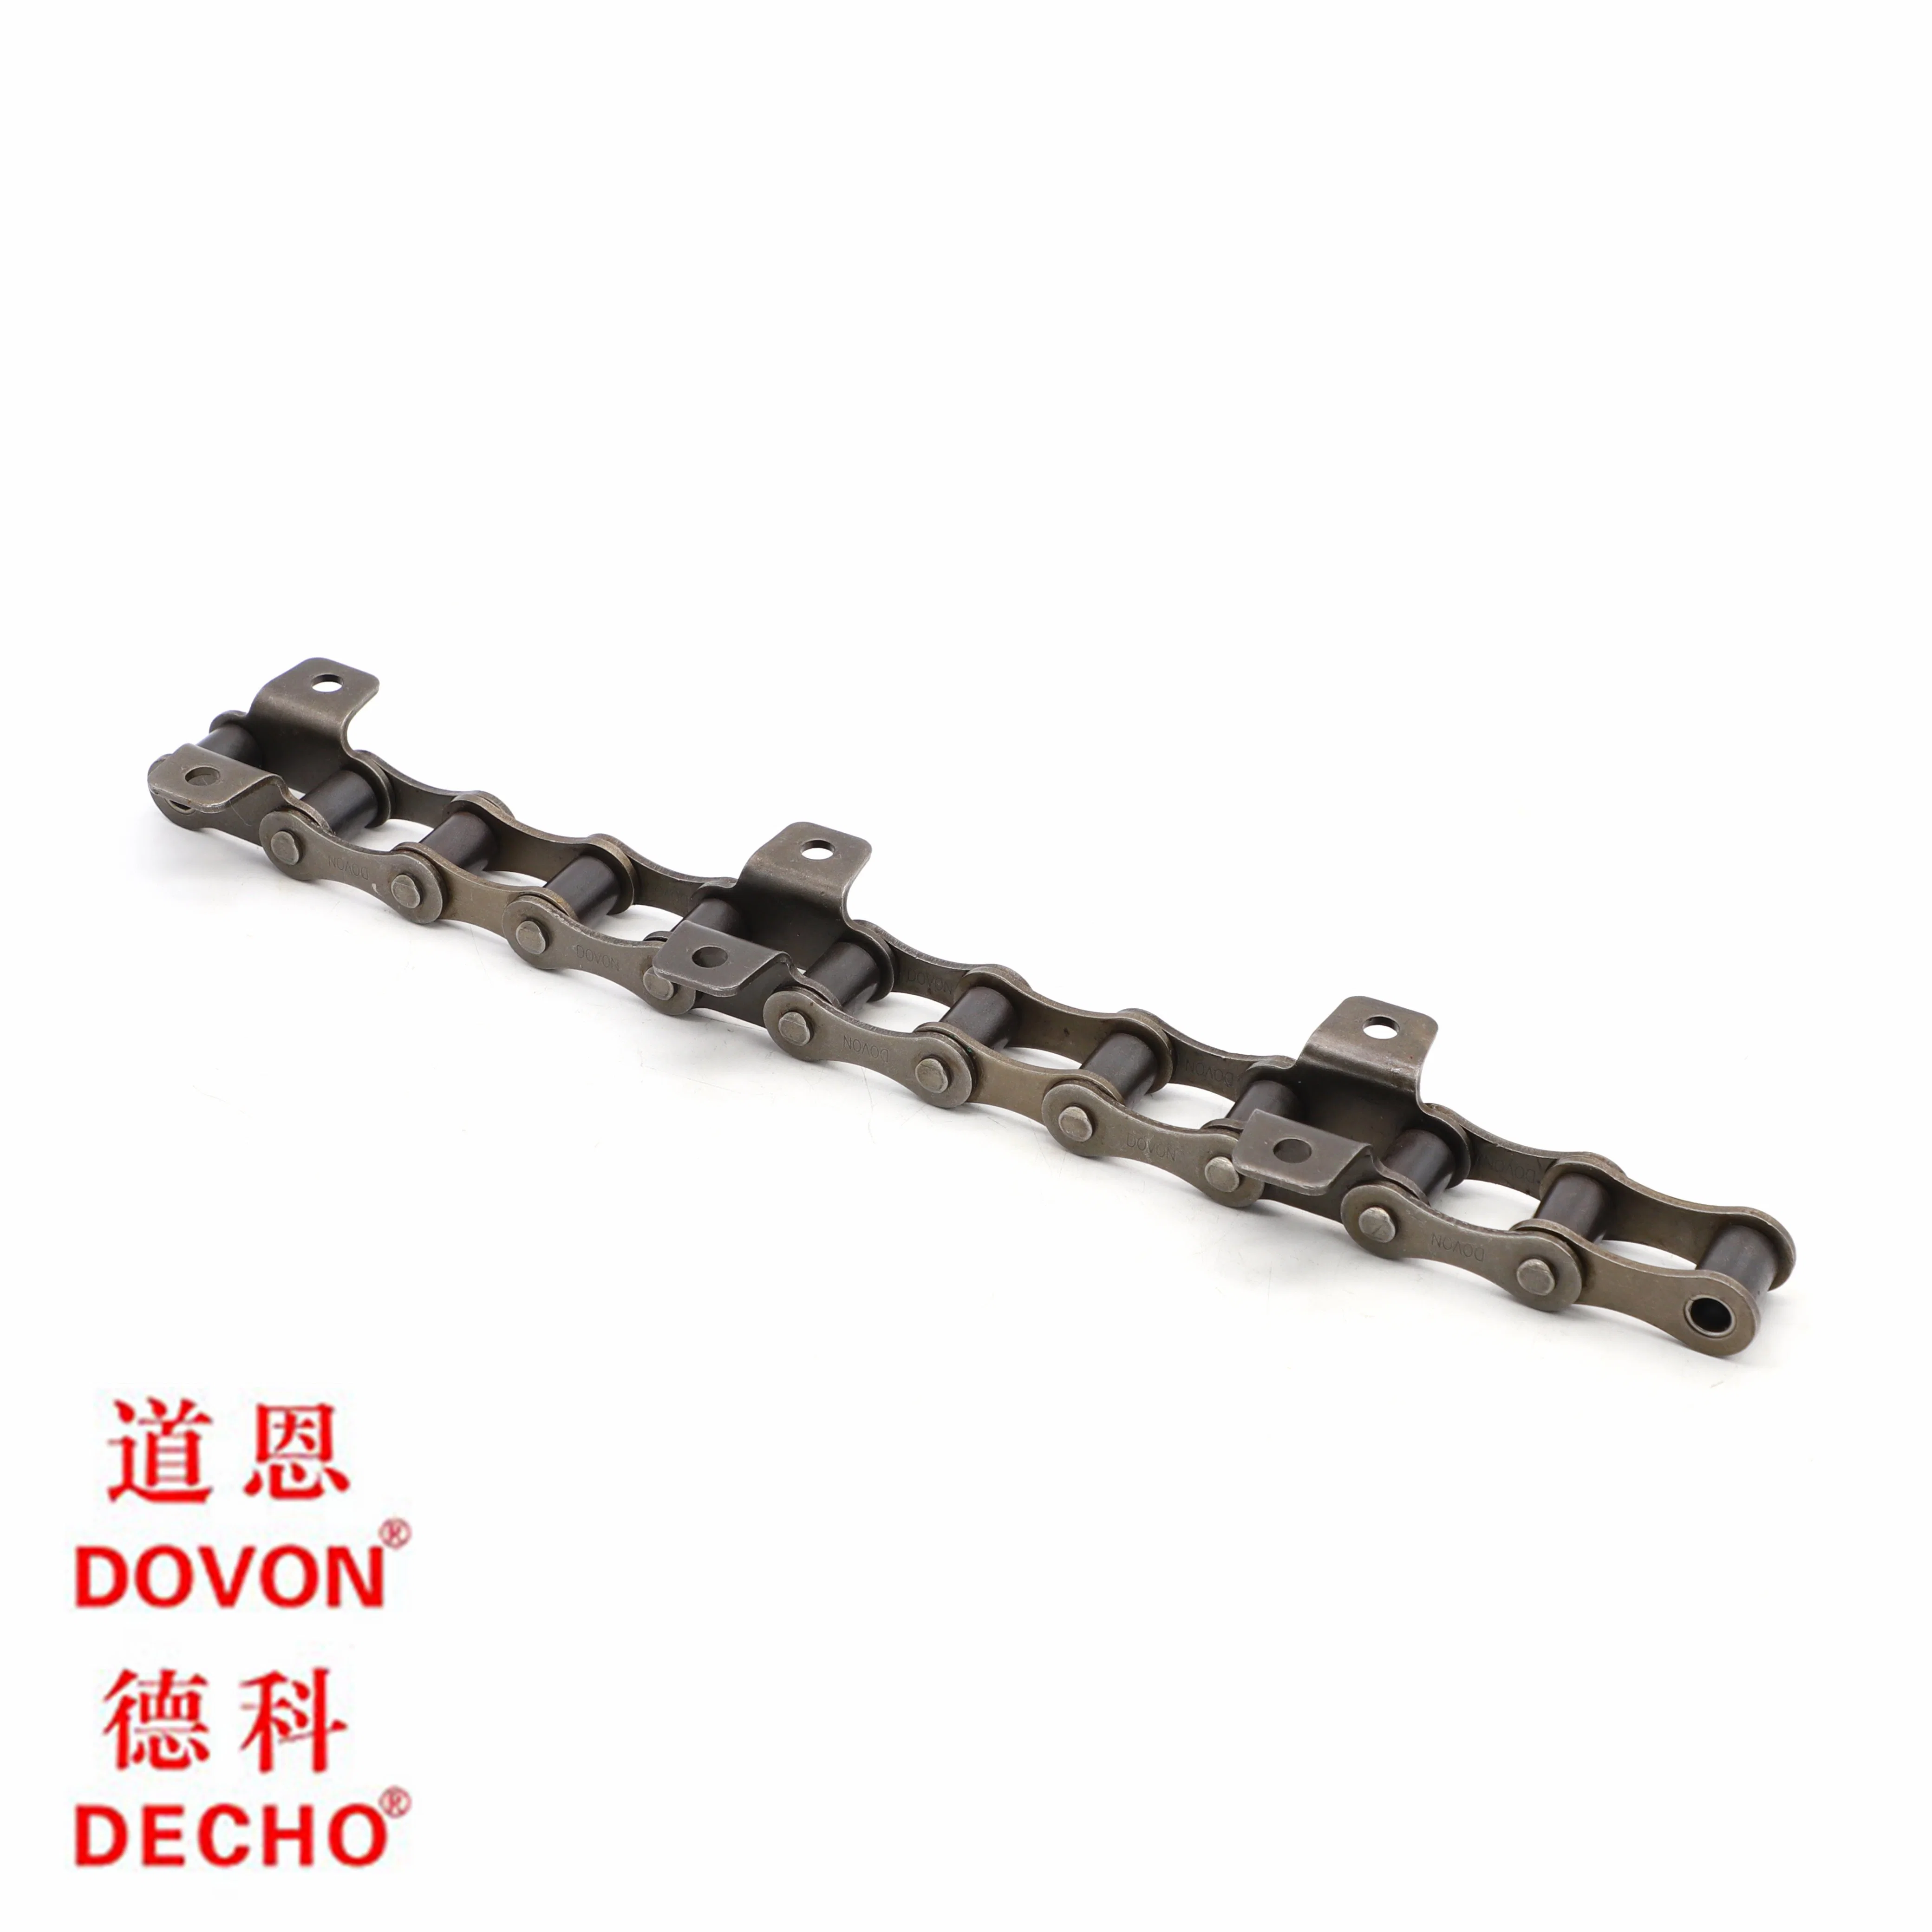 16A-3 Tripple Row Industrial Transmission Conveyor Drive Roller Chain Carbon Steel Polishing Chain for Industry Conveyor System